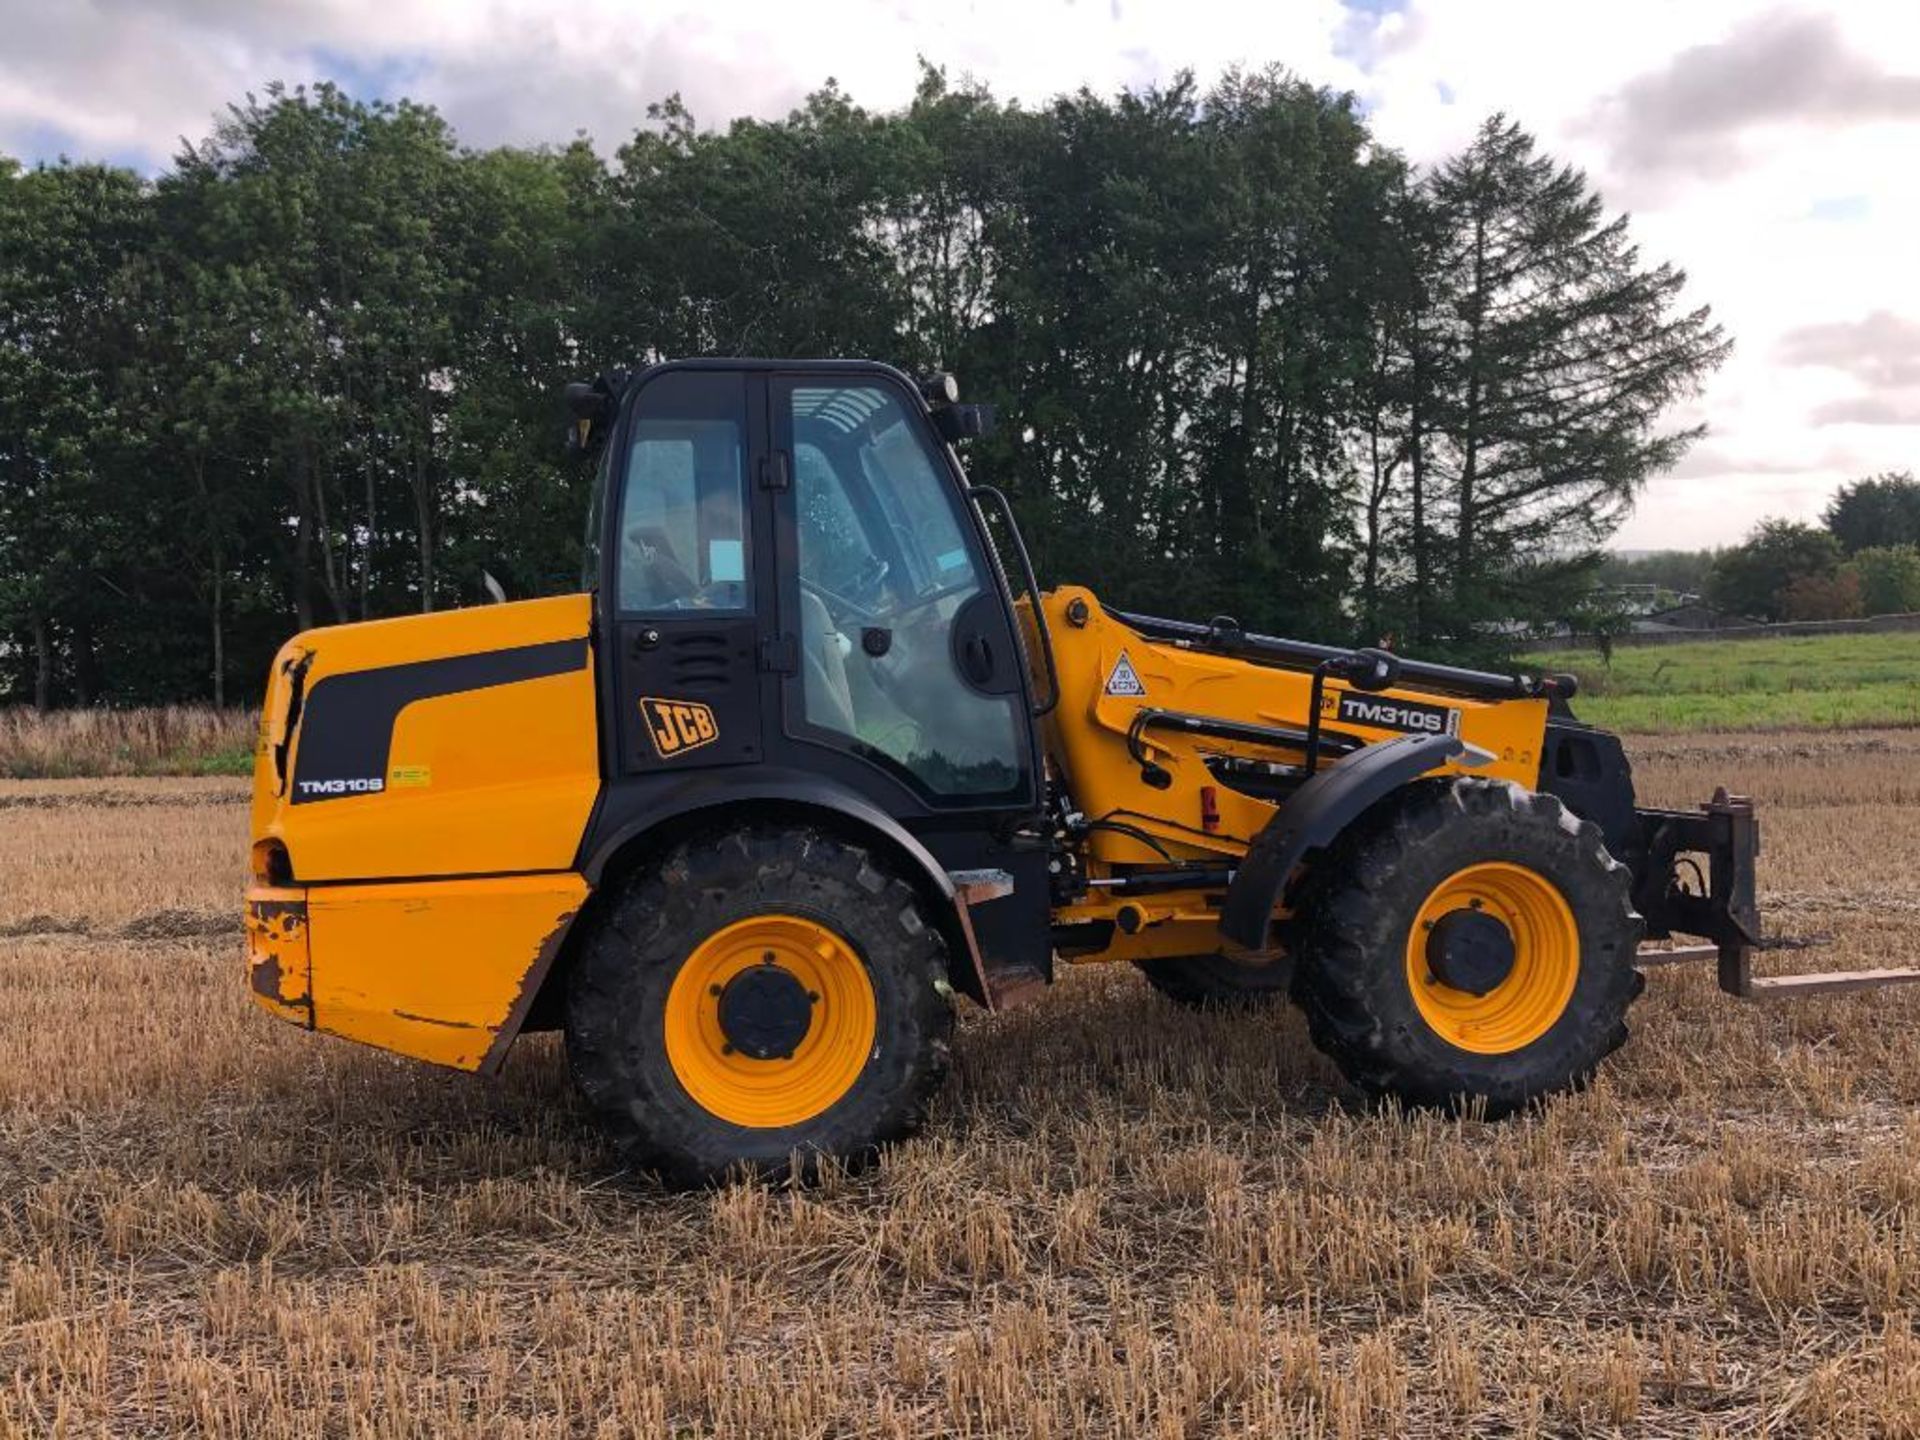 2010 JCB TM310S Agri pivot steer materials handler on 460/70R42 wheels and tyres with pallet tines, - Image 10 of 15